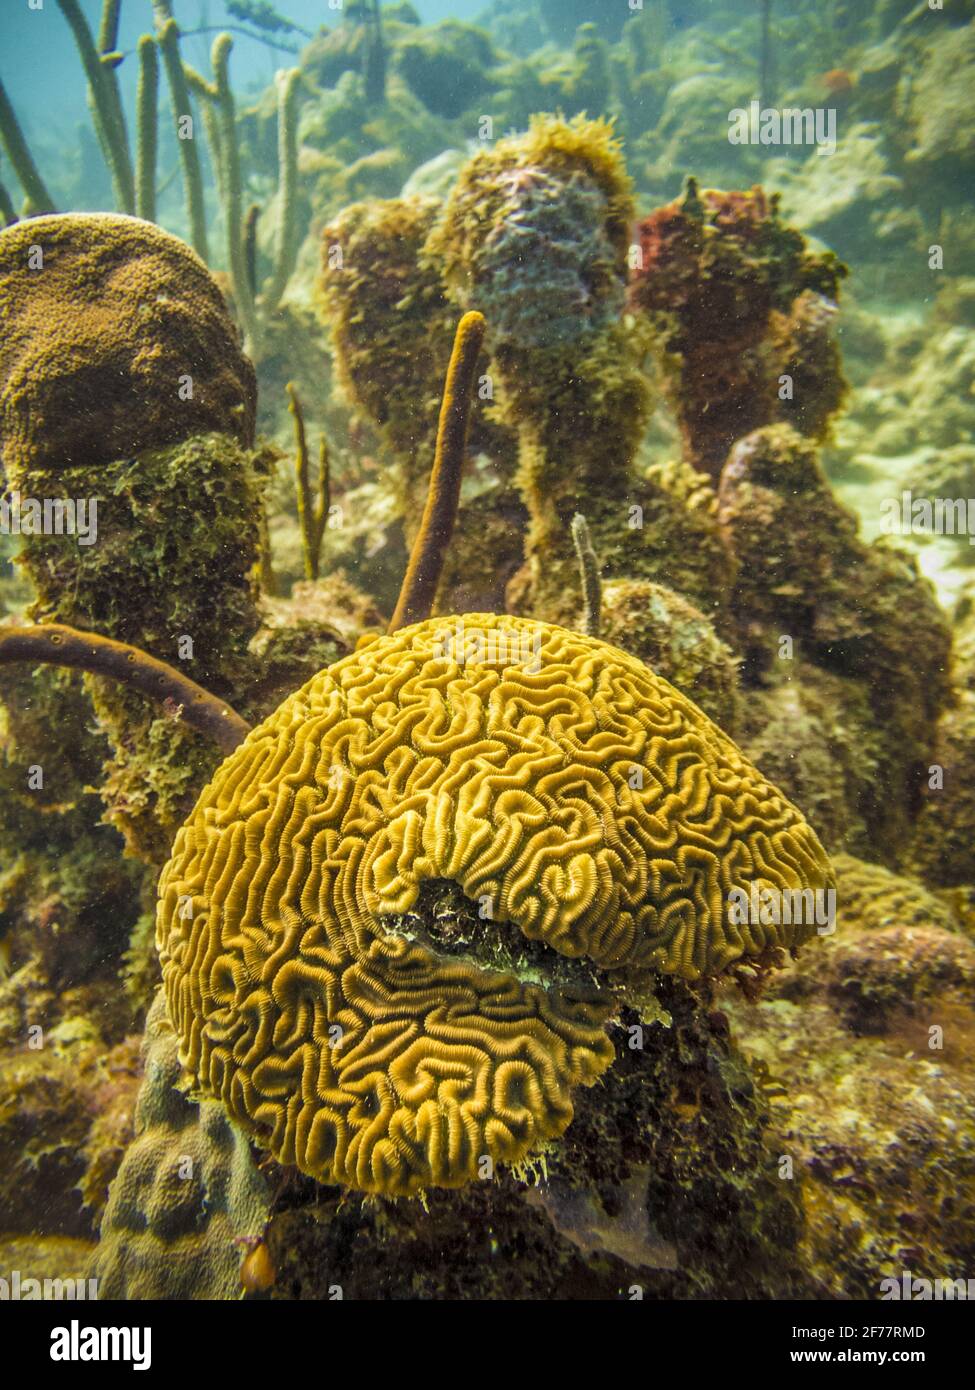 France, Caribbean, French West Indies, Guadeloupe, Grand Cul-de-Sac marin, heart of the national park of Guadeloupe, scuba diving on the site of Pierre aux Anges, in the lagoon around the islet Fajou, brain coral, underwater view Stock Photo